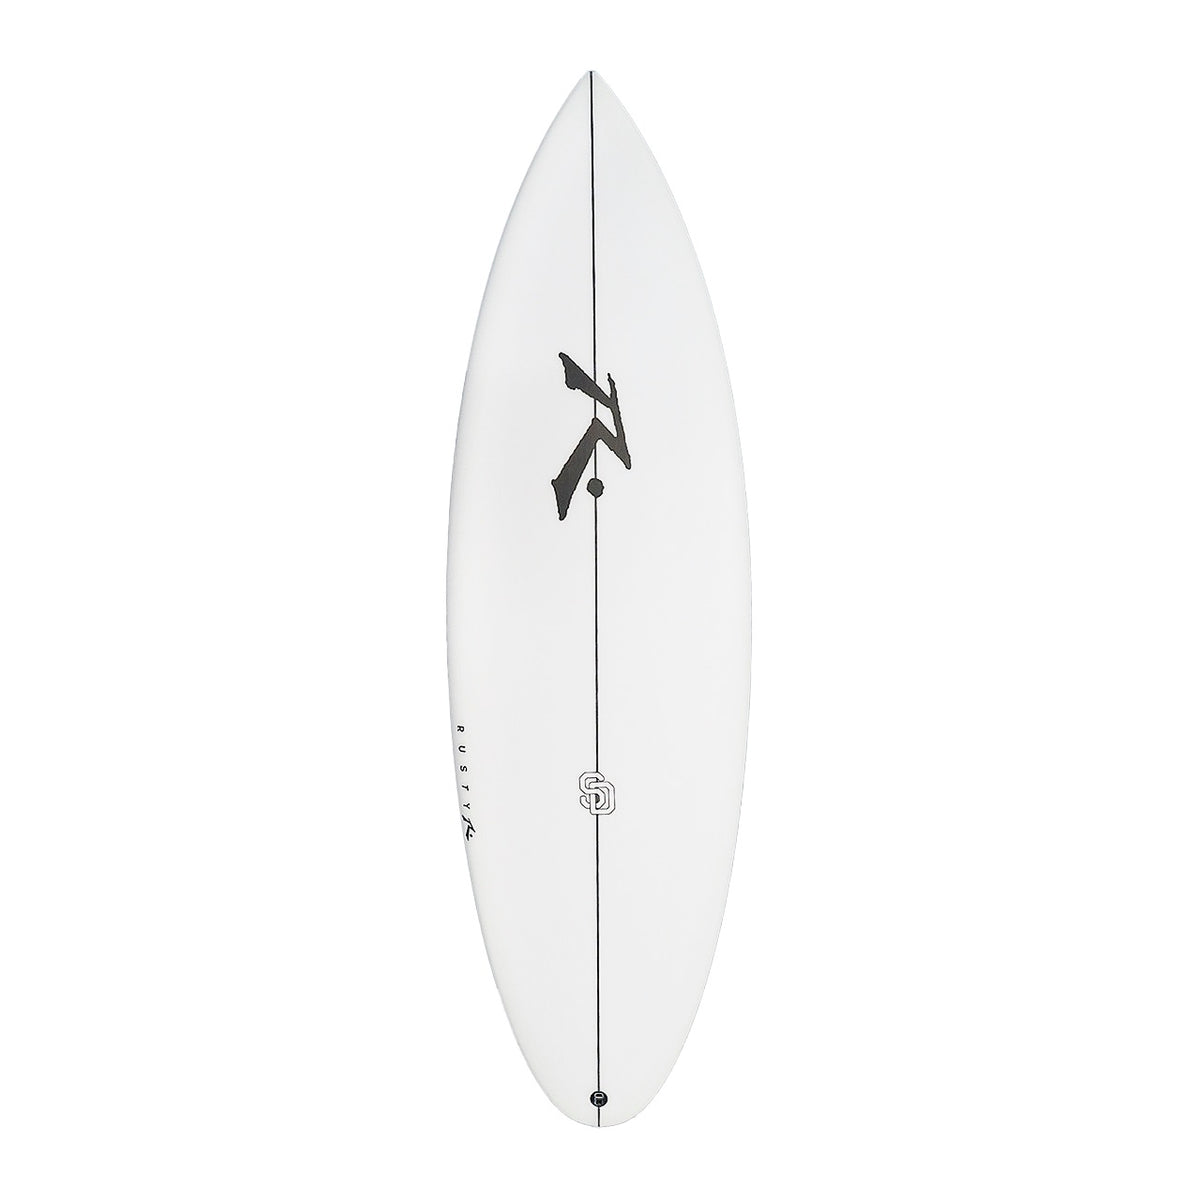 SD RT RE Grom - Deck View - Rusty Surfboards